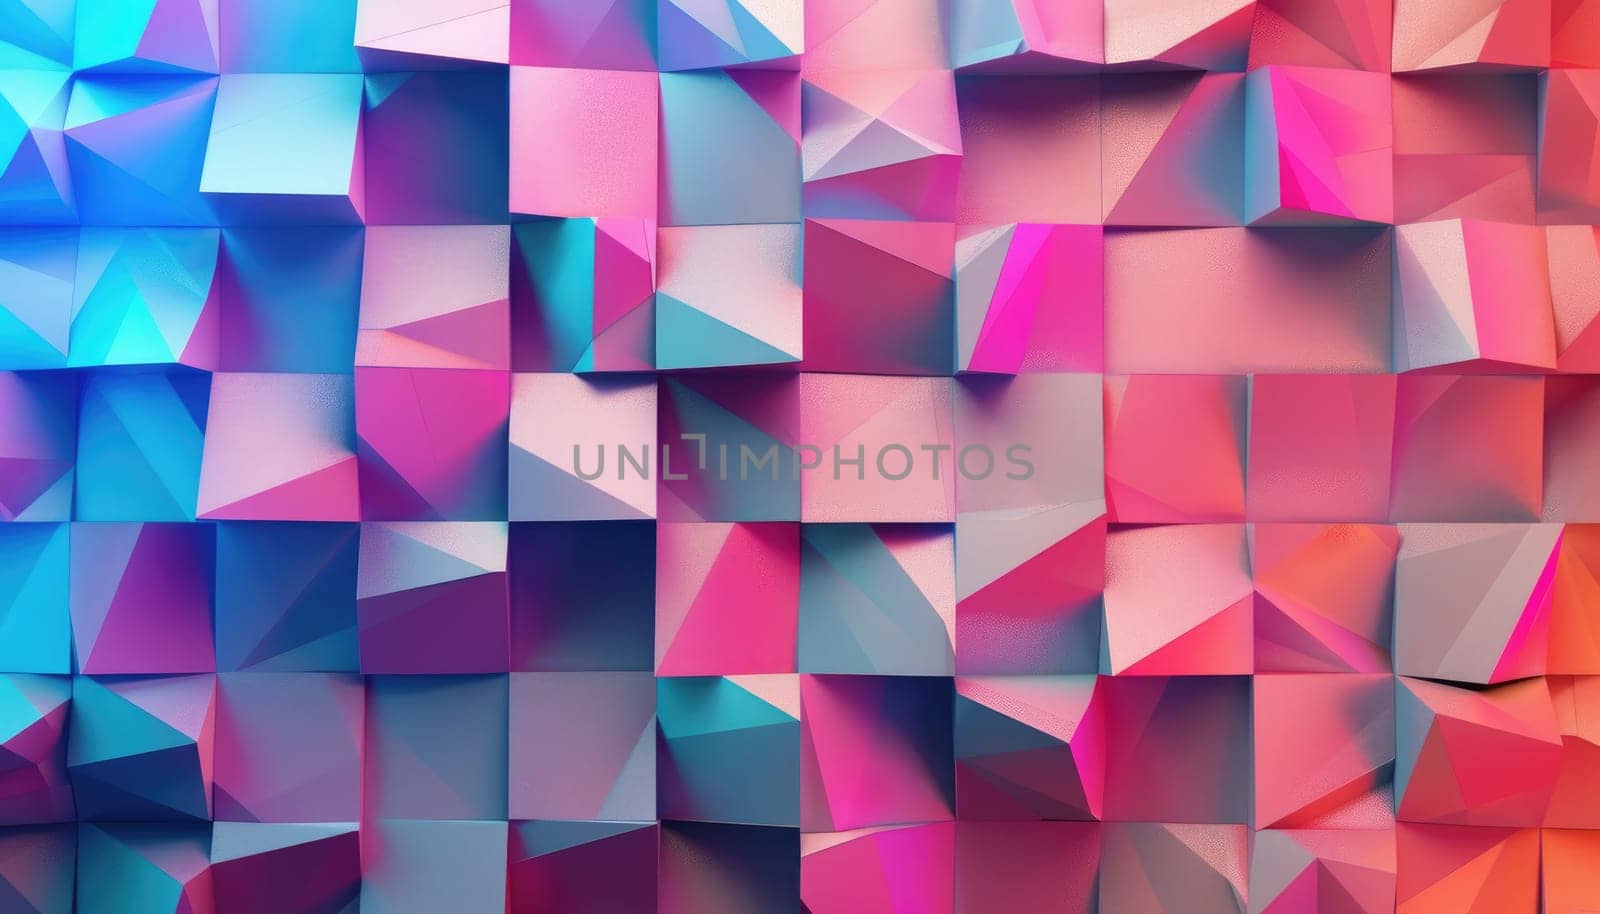 A colorful background with pink, blue, and purple blocks by AI generated image.